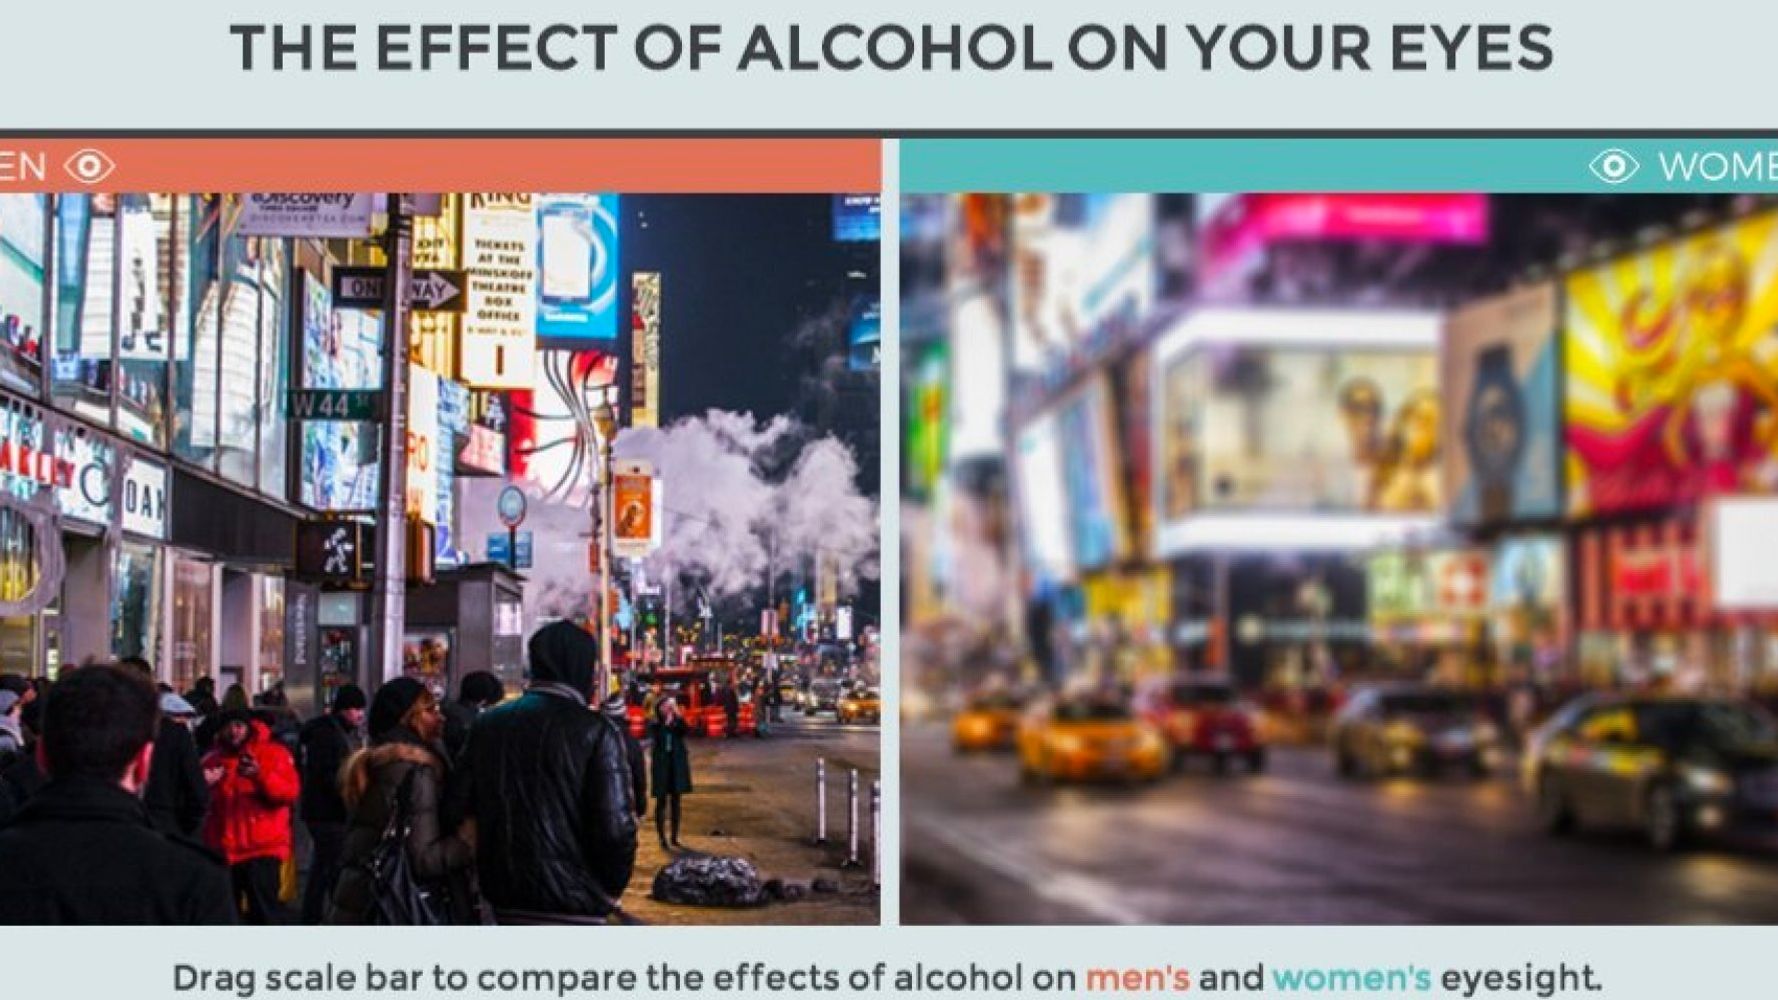 Effects of Alcohol on the Eyes